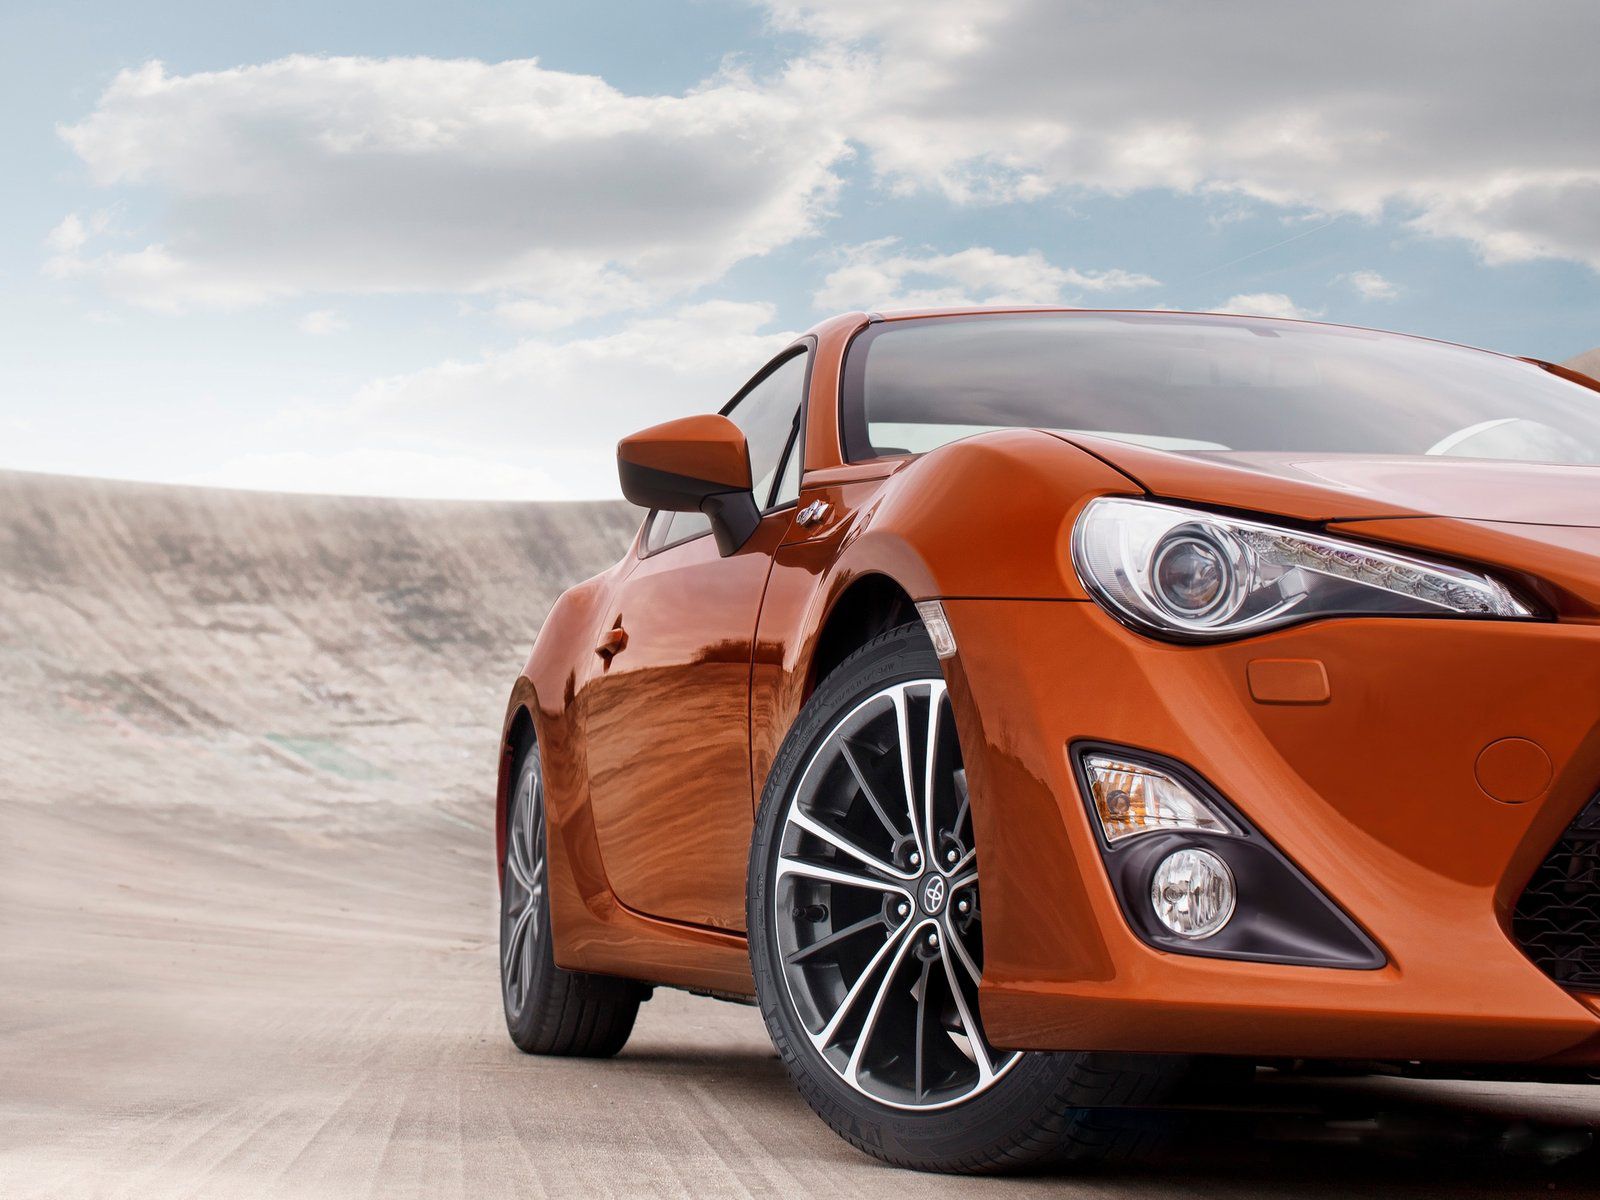 2013 Toyota GT 86 41244325 Image (1600x1200) - Car Images in HD ...